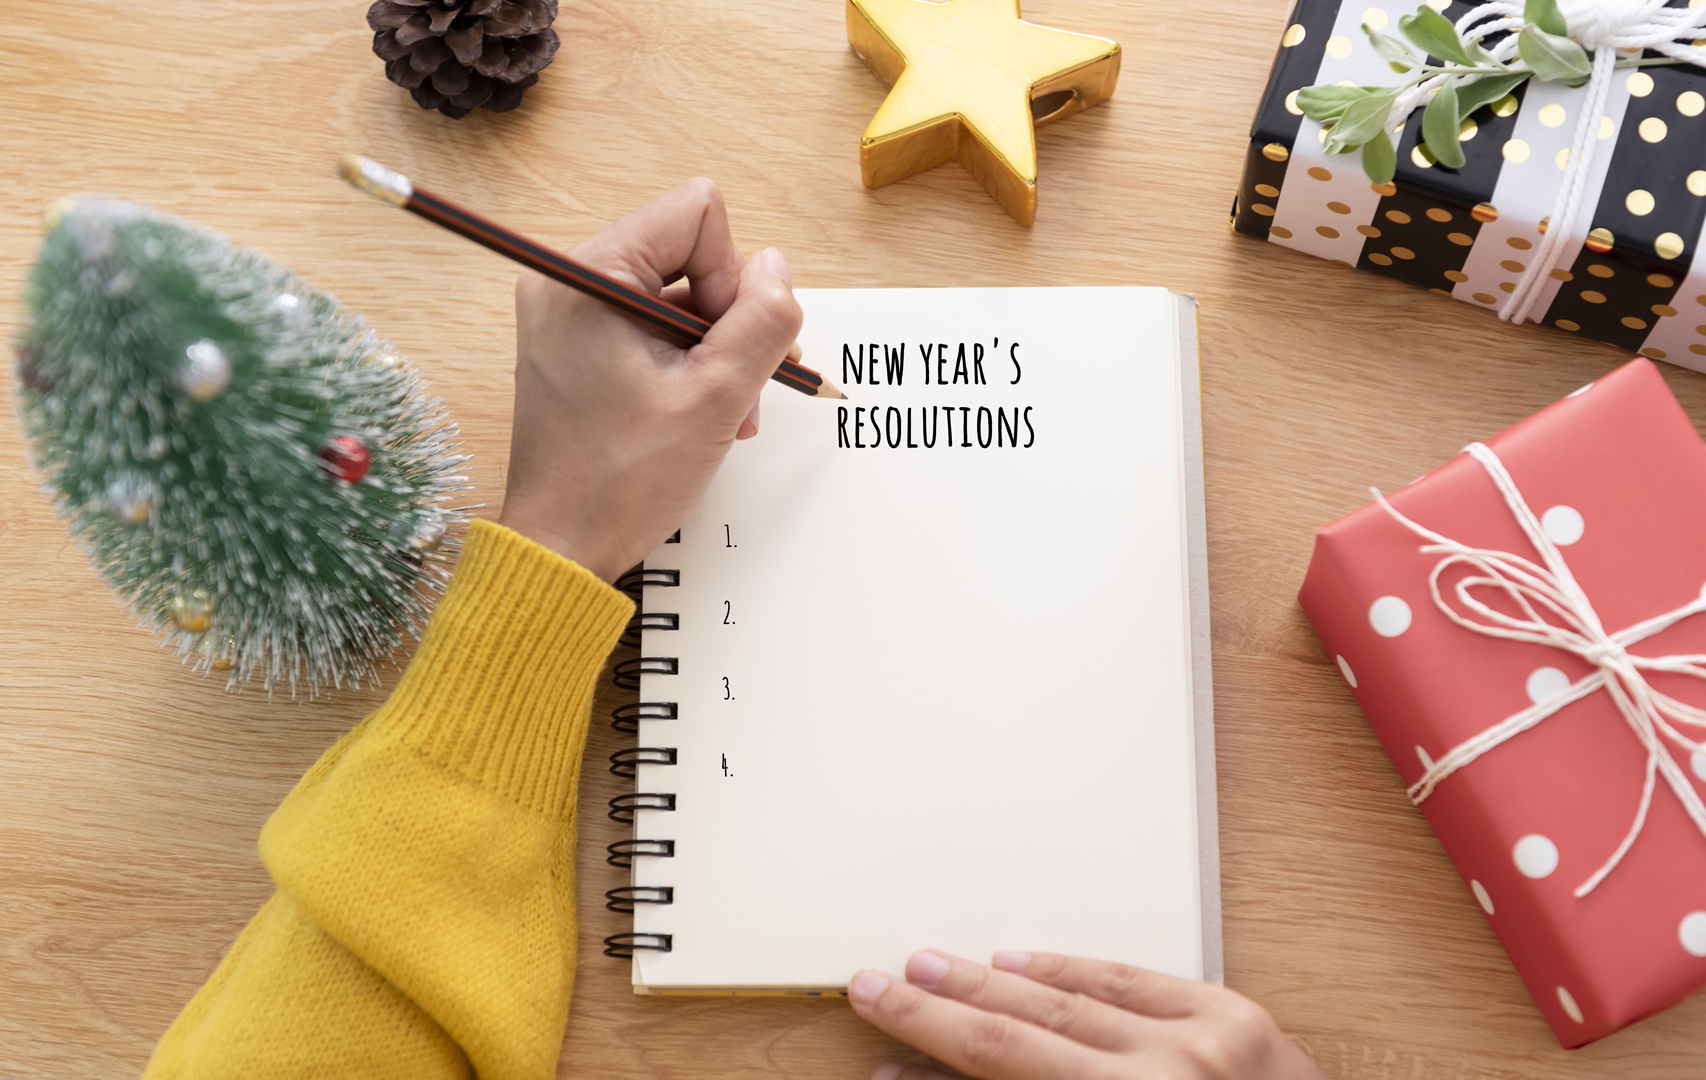 New Year’s Resolutions, Intentions or Goals?